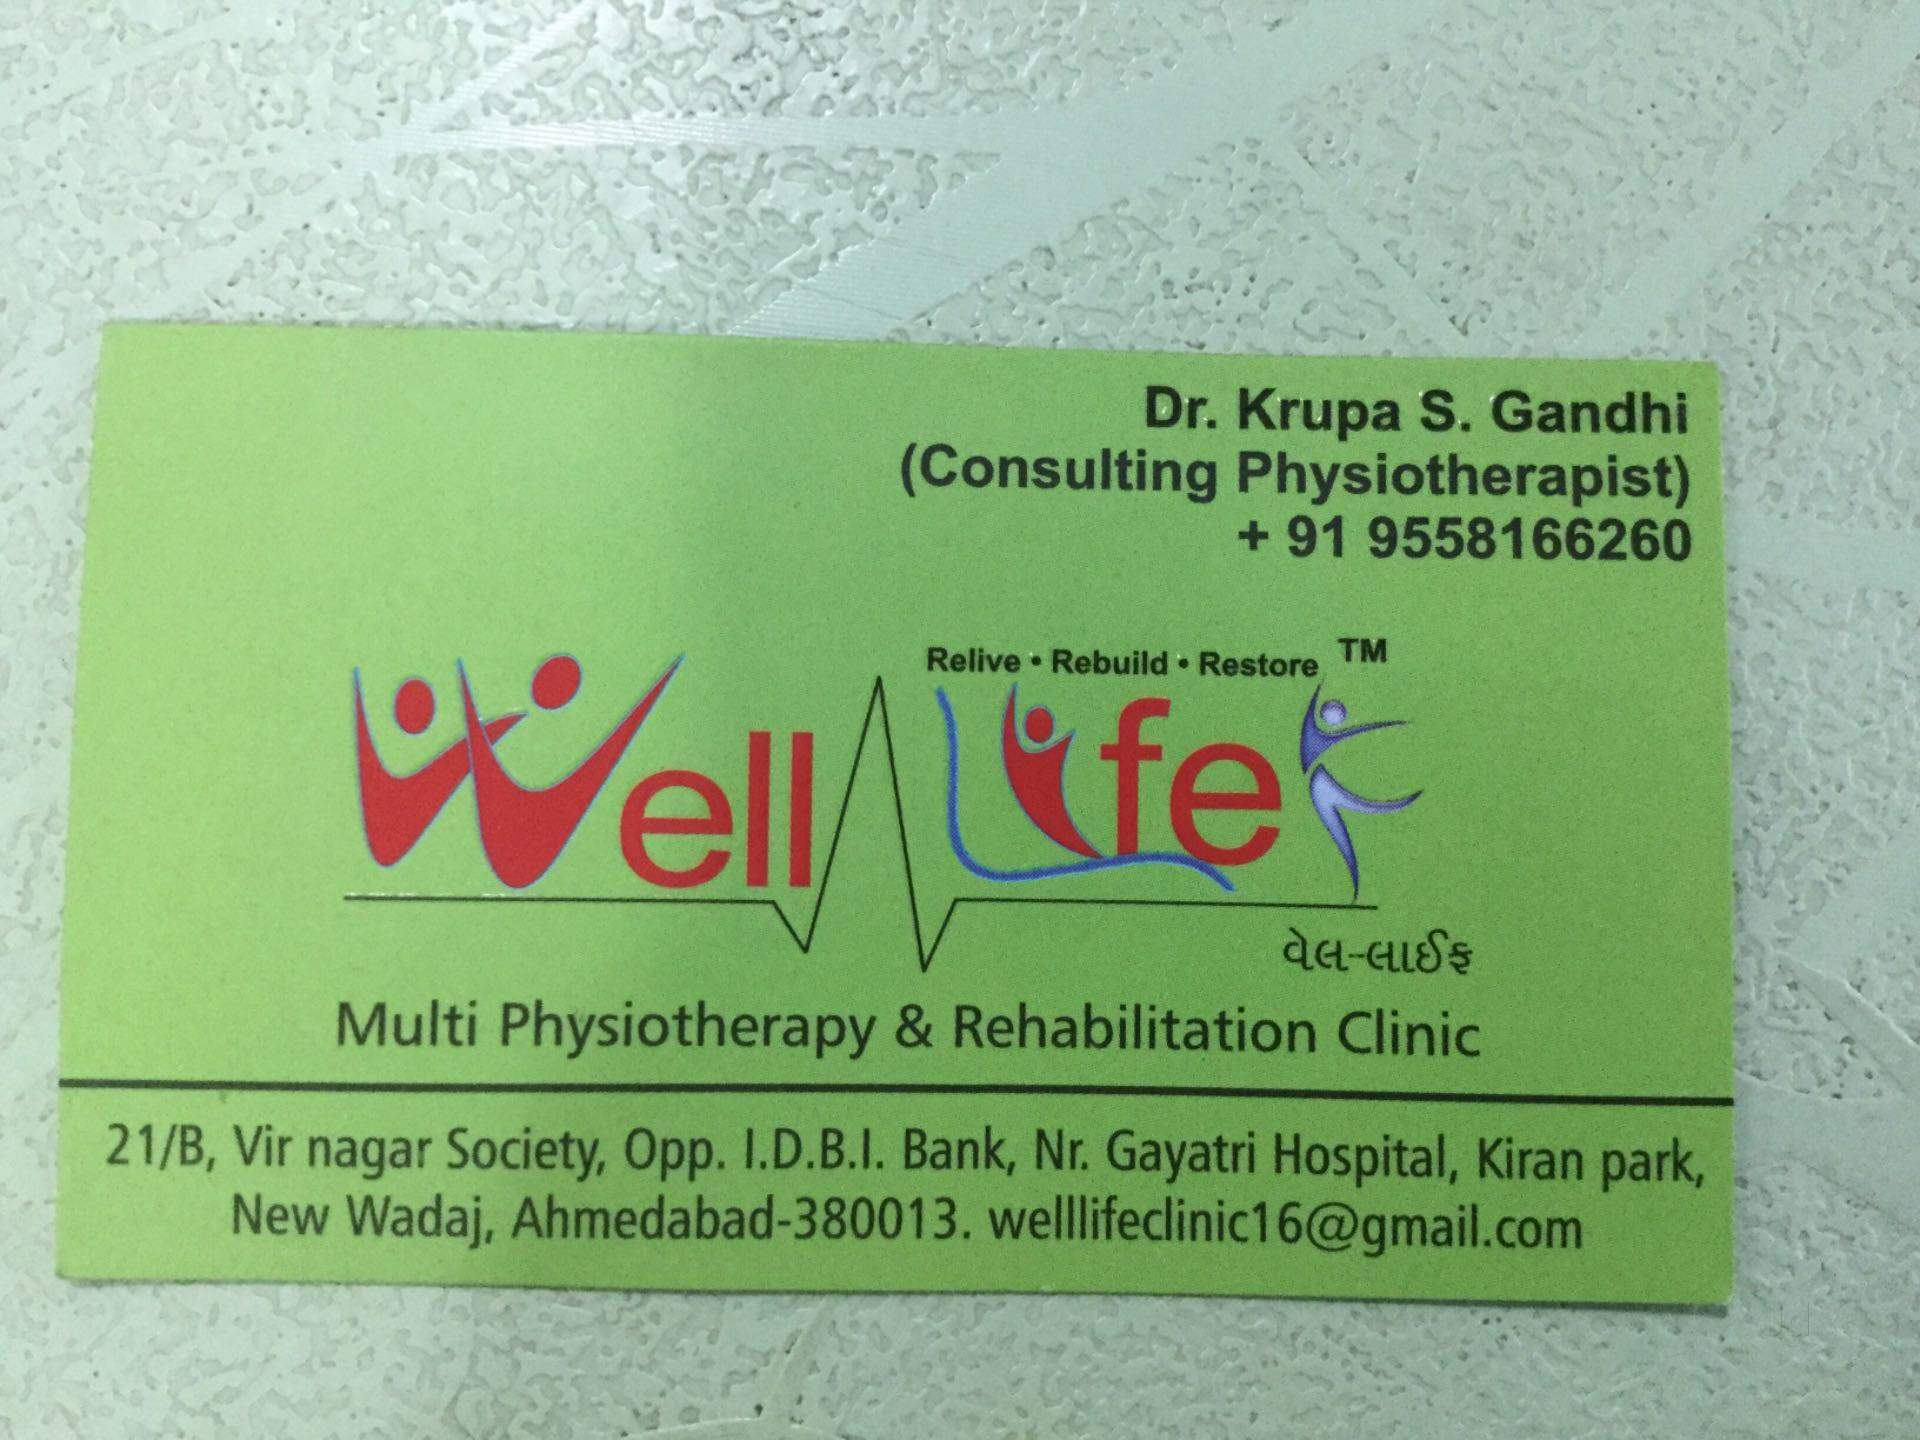 Well Life Multi Physiotherapy Rehabilitation Weight Loss Clinic